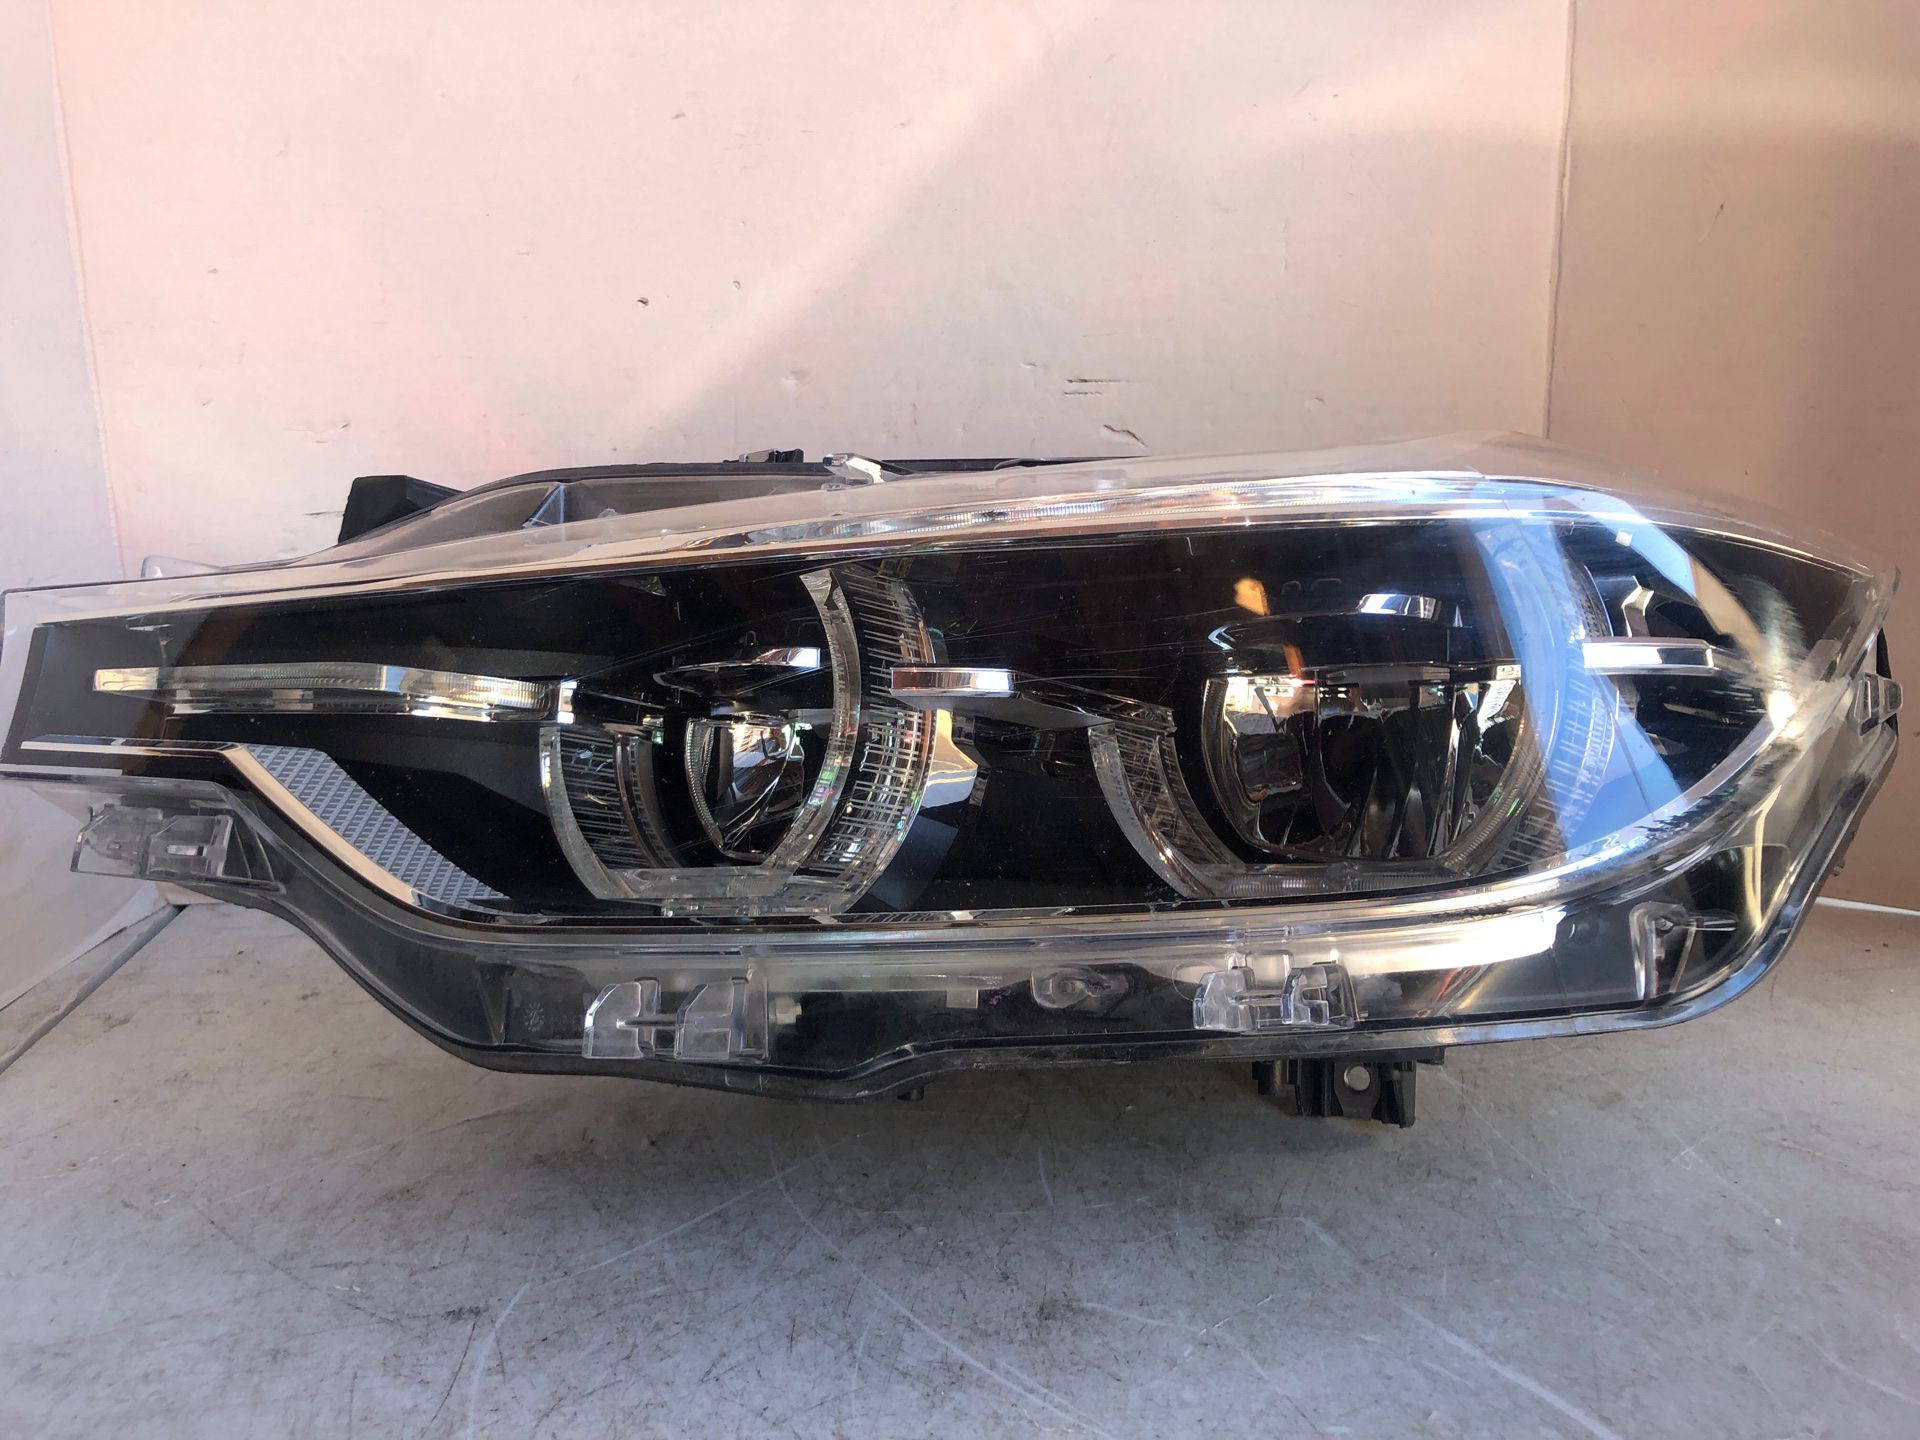 2016 2017 2018 BMW 320i 330i M3 Left Driver Side LED LCI Headlight  7498949-01 for Sale in Anaheim, CA OfferUp